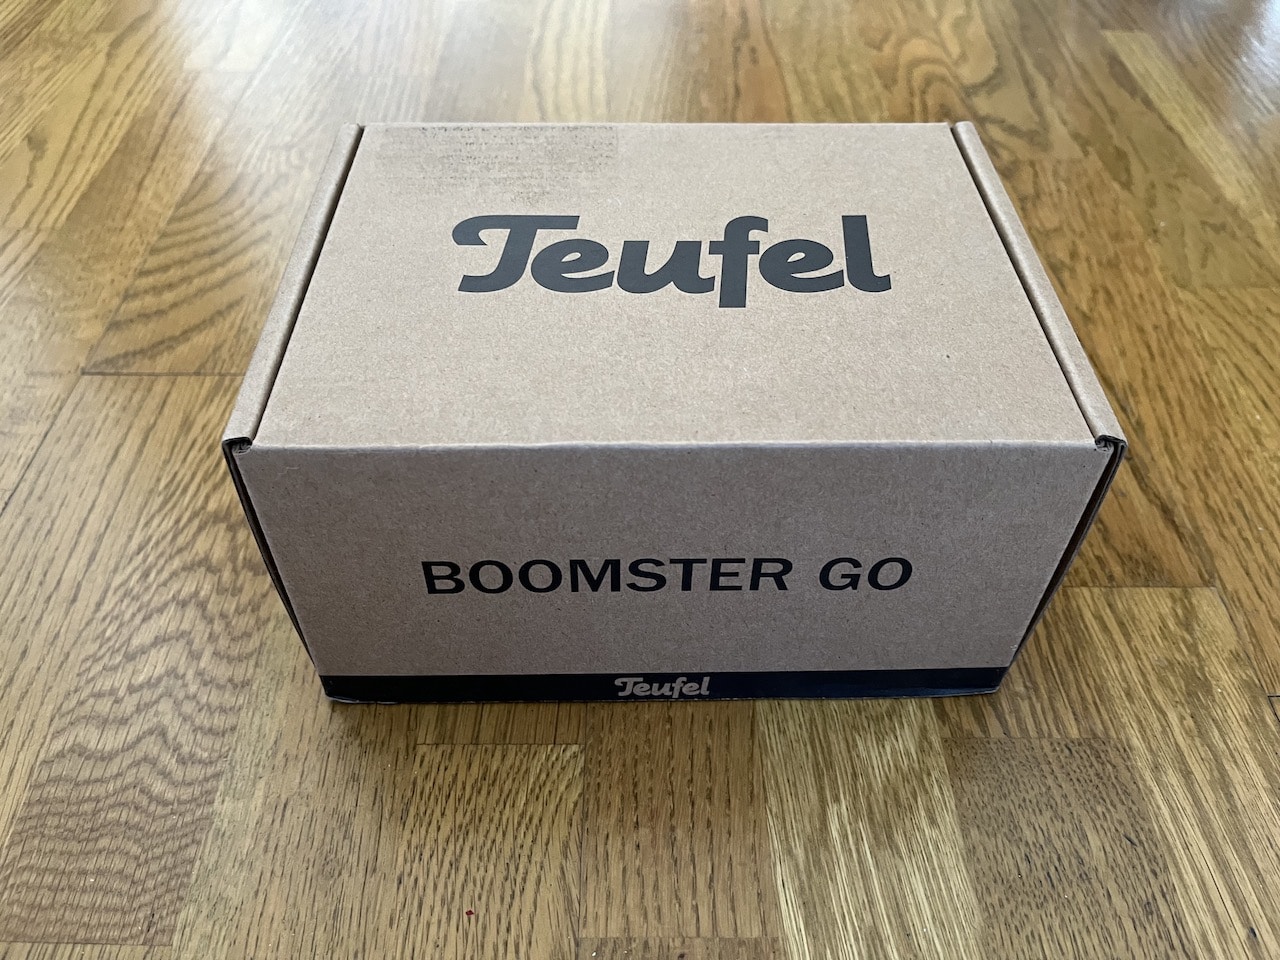 teufel_boomster_go_box